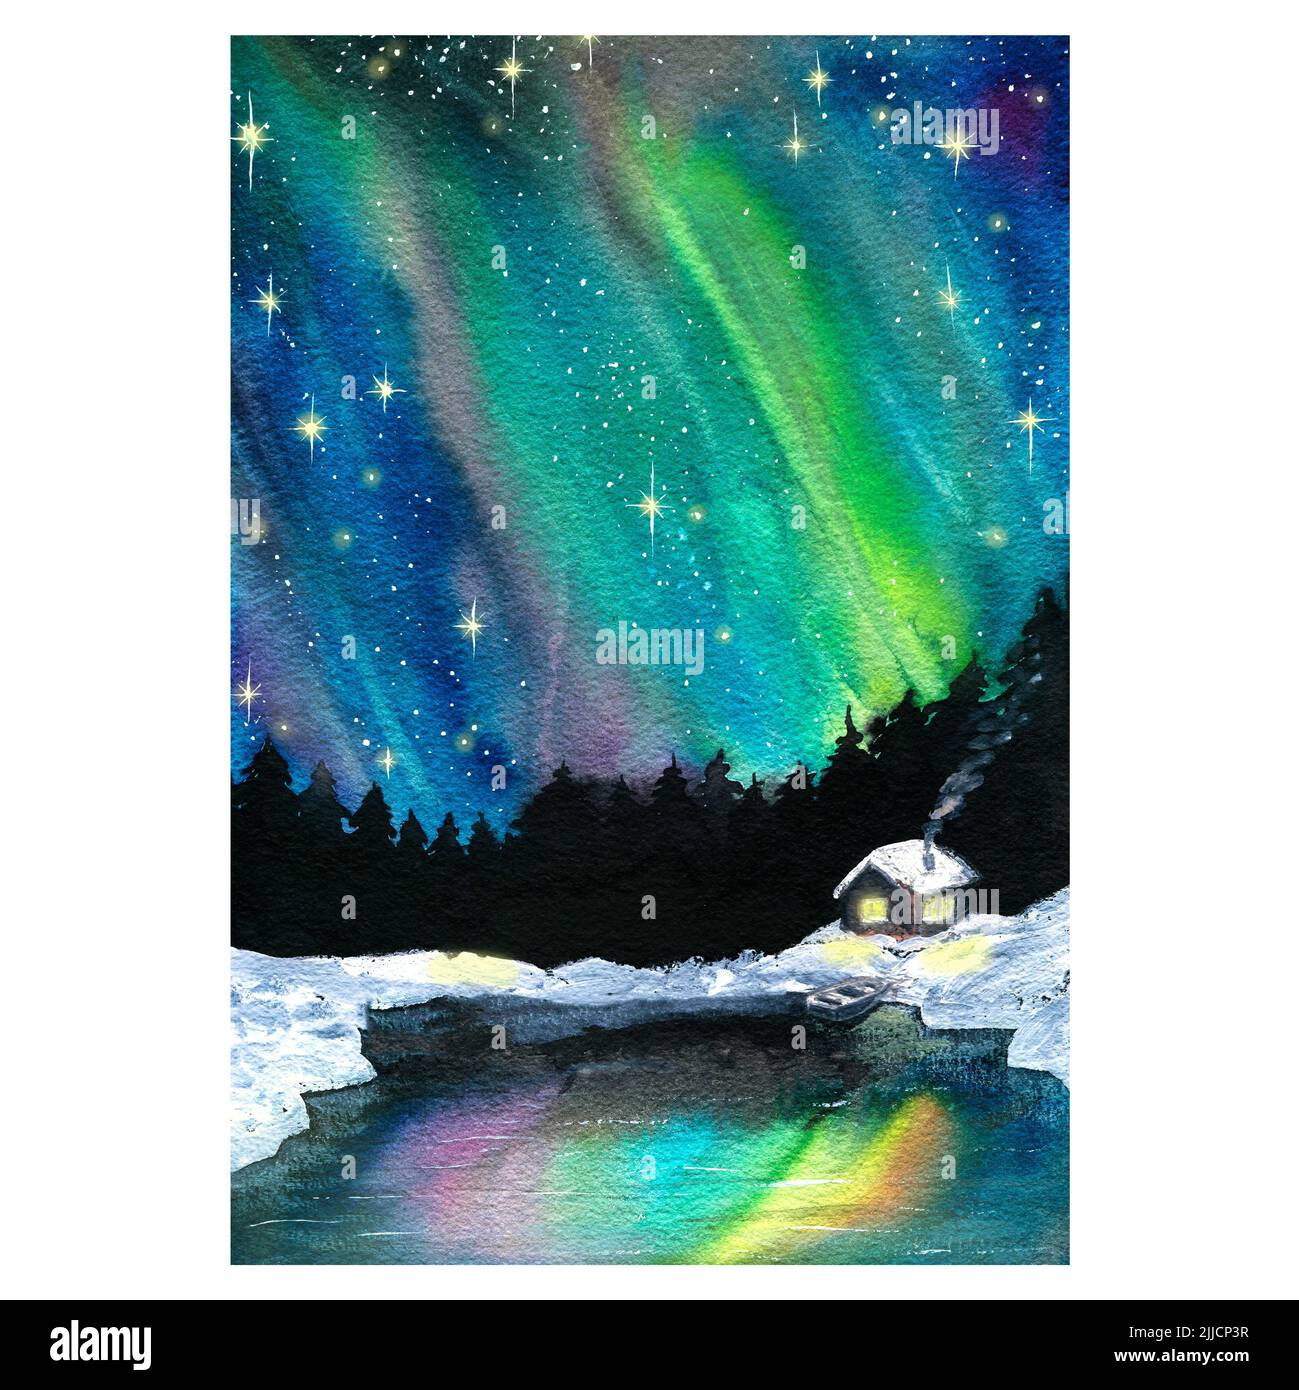 Winter landscape, northern lights in the sky, forest and a hut by the lake in the snow. Watercolor illustration. For the design and decoration of Stock Photo